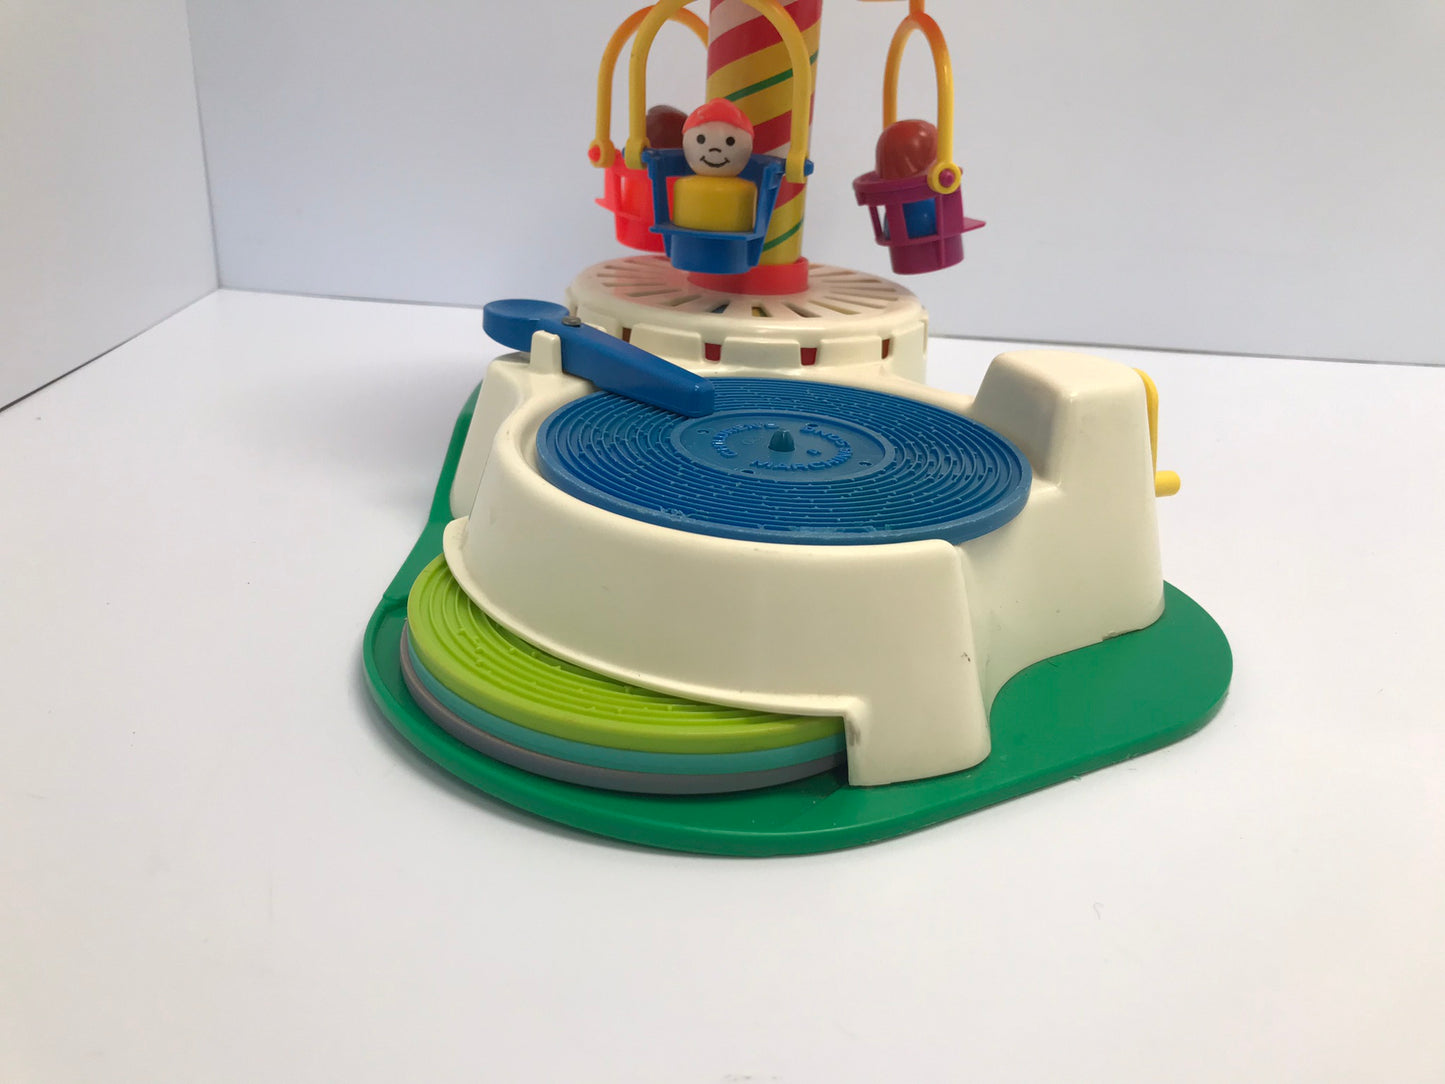 Classic Vintage 1980 Fisher Price Little People Change-A-Tune Carousel #170 With 4 Double Sided Records Works Great Complete